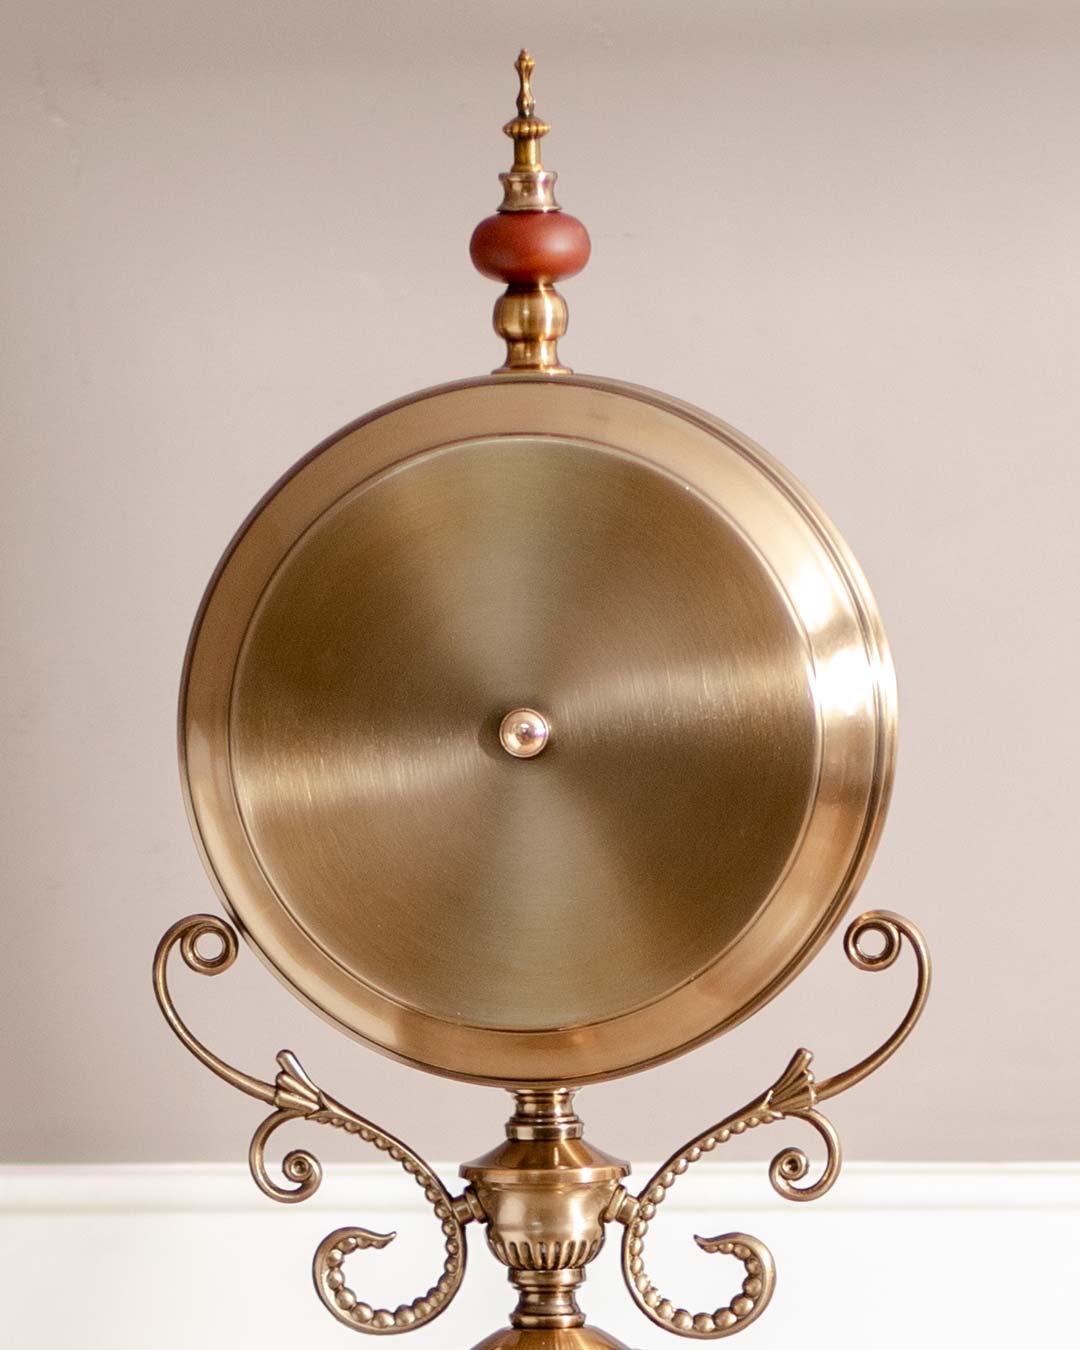 Stately 'Seville' red floor clock with a gold ornate clock face, an exquisite decor item for refined tastes.